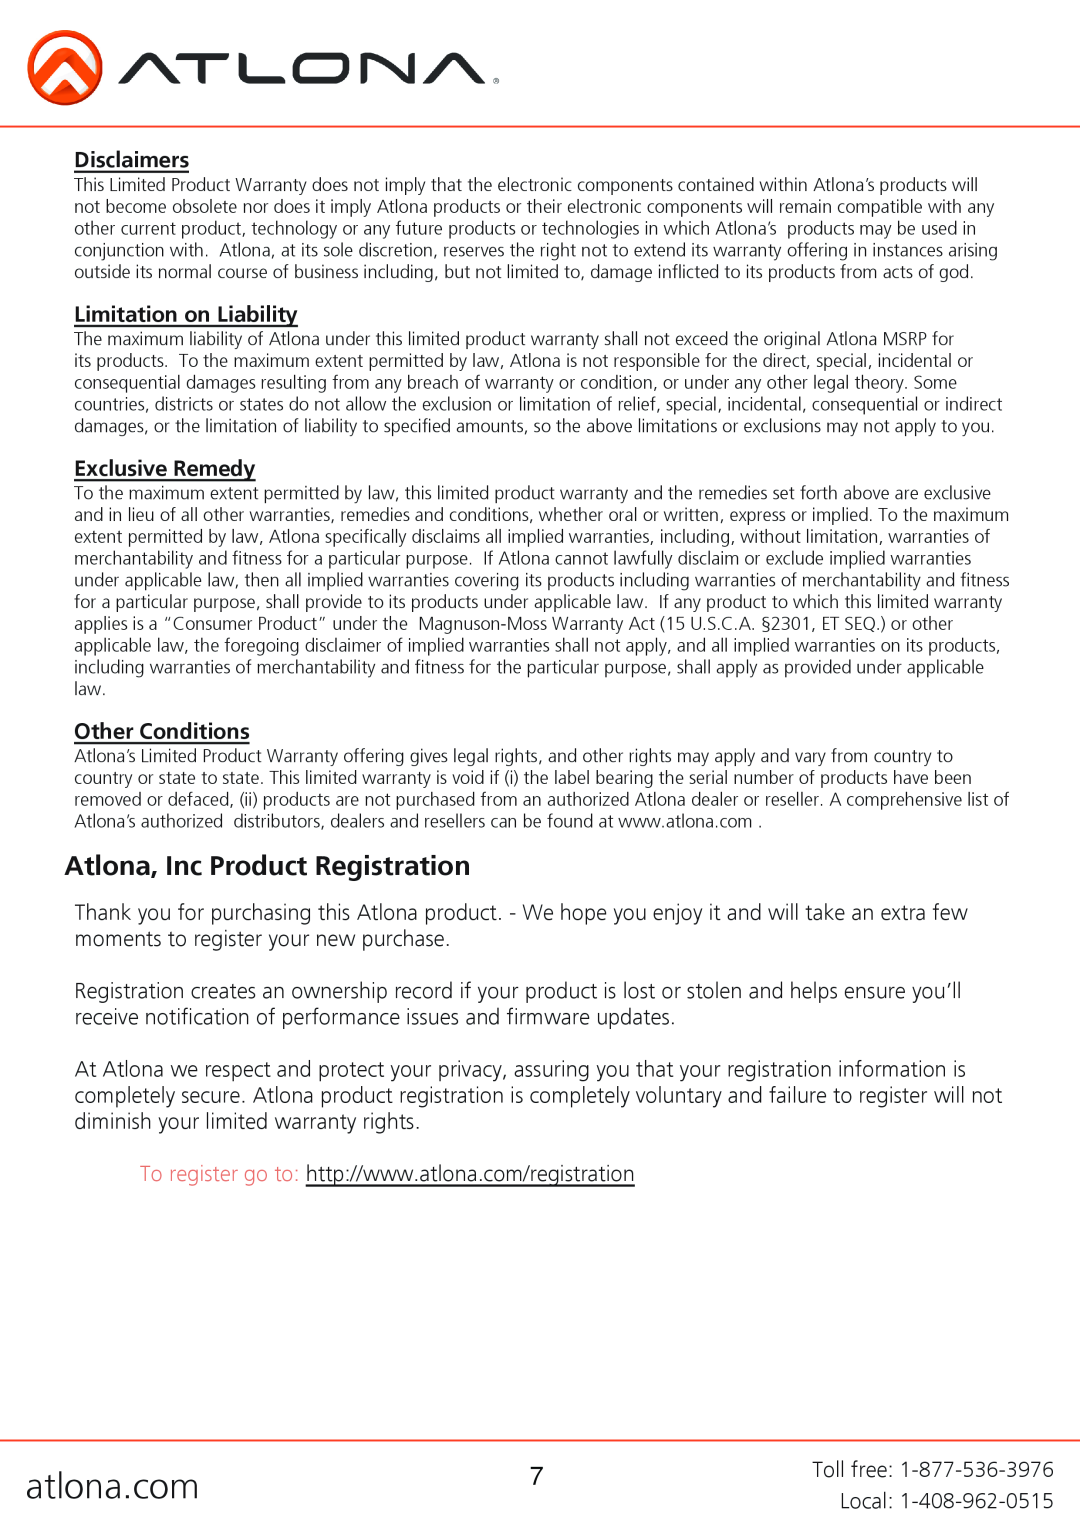 Atlona AT-APC21A user manual Atlona, Inc Product Registration, Disclaimers, Limitation on Liability, Exclusive Remedy 